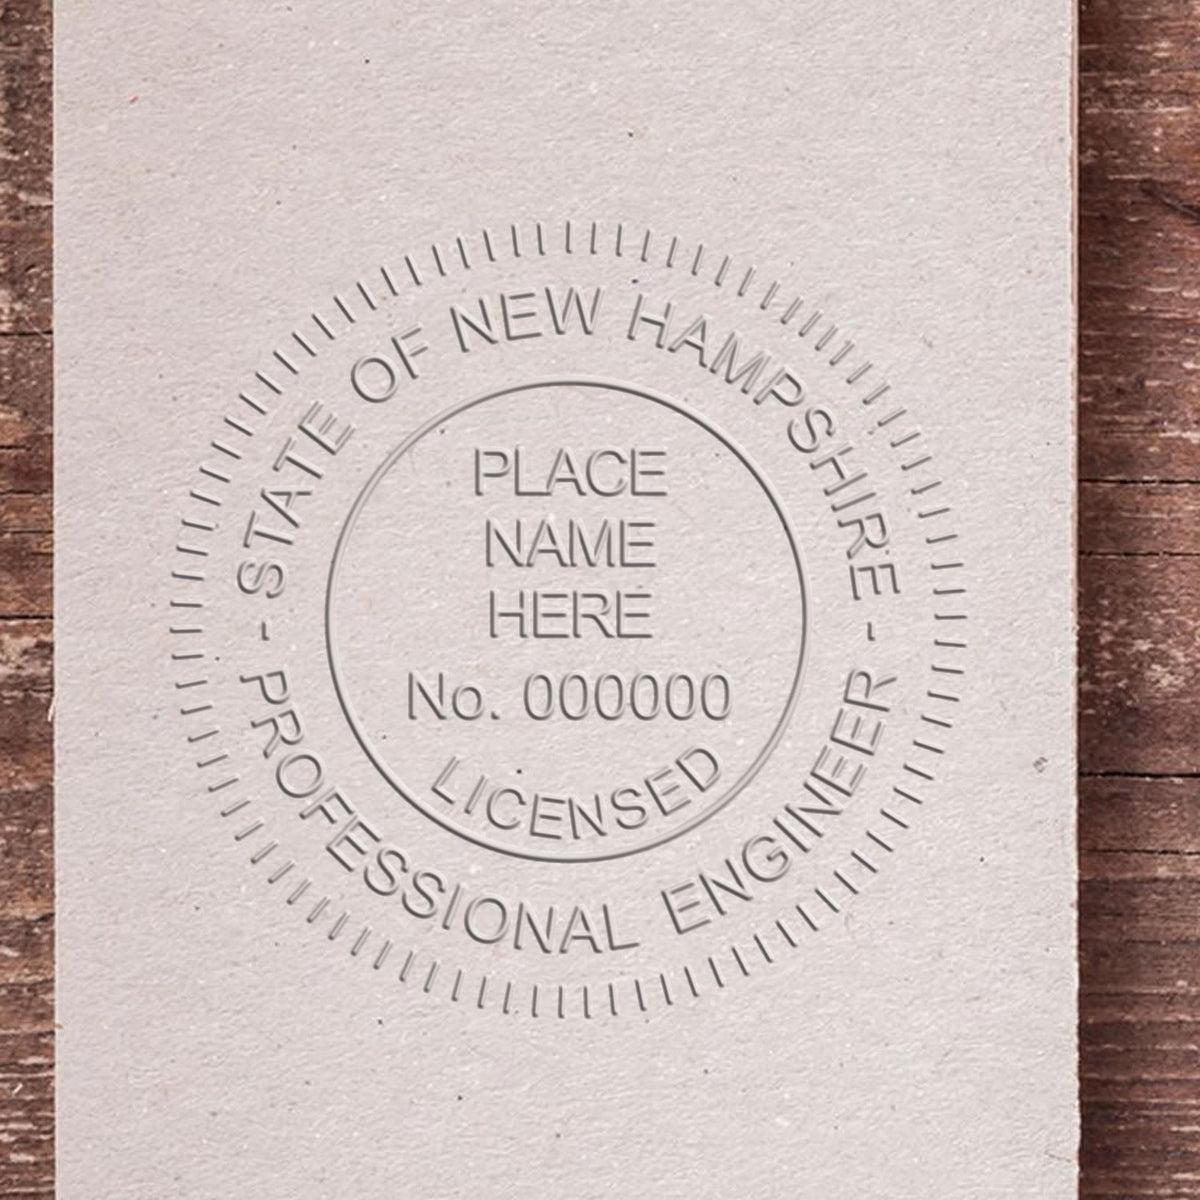 A photograph of the Hybrid New Hampshire Engineer Seal stamp impression reveals a vivid, professional image of the on paper.